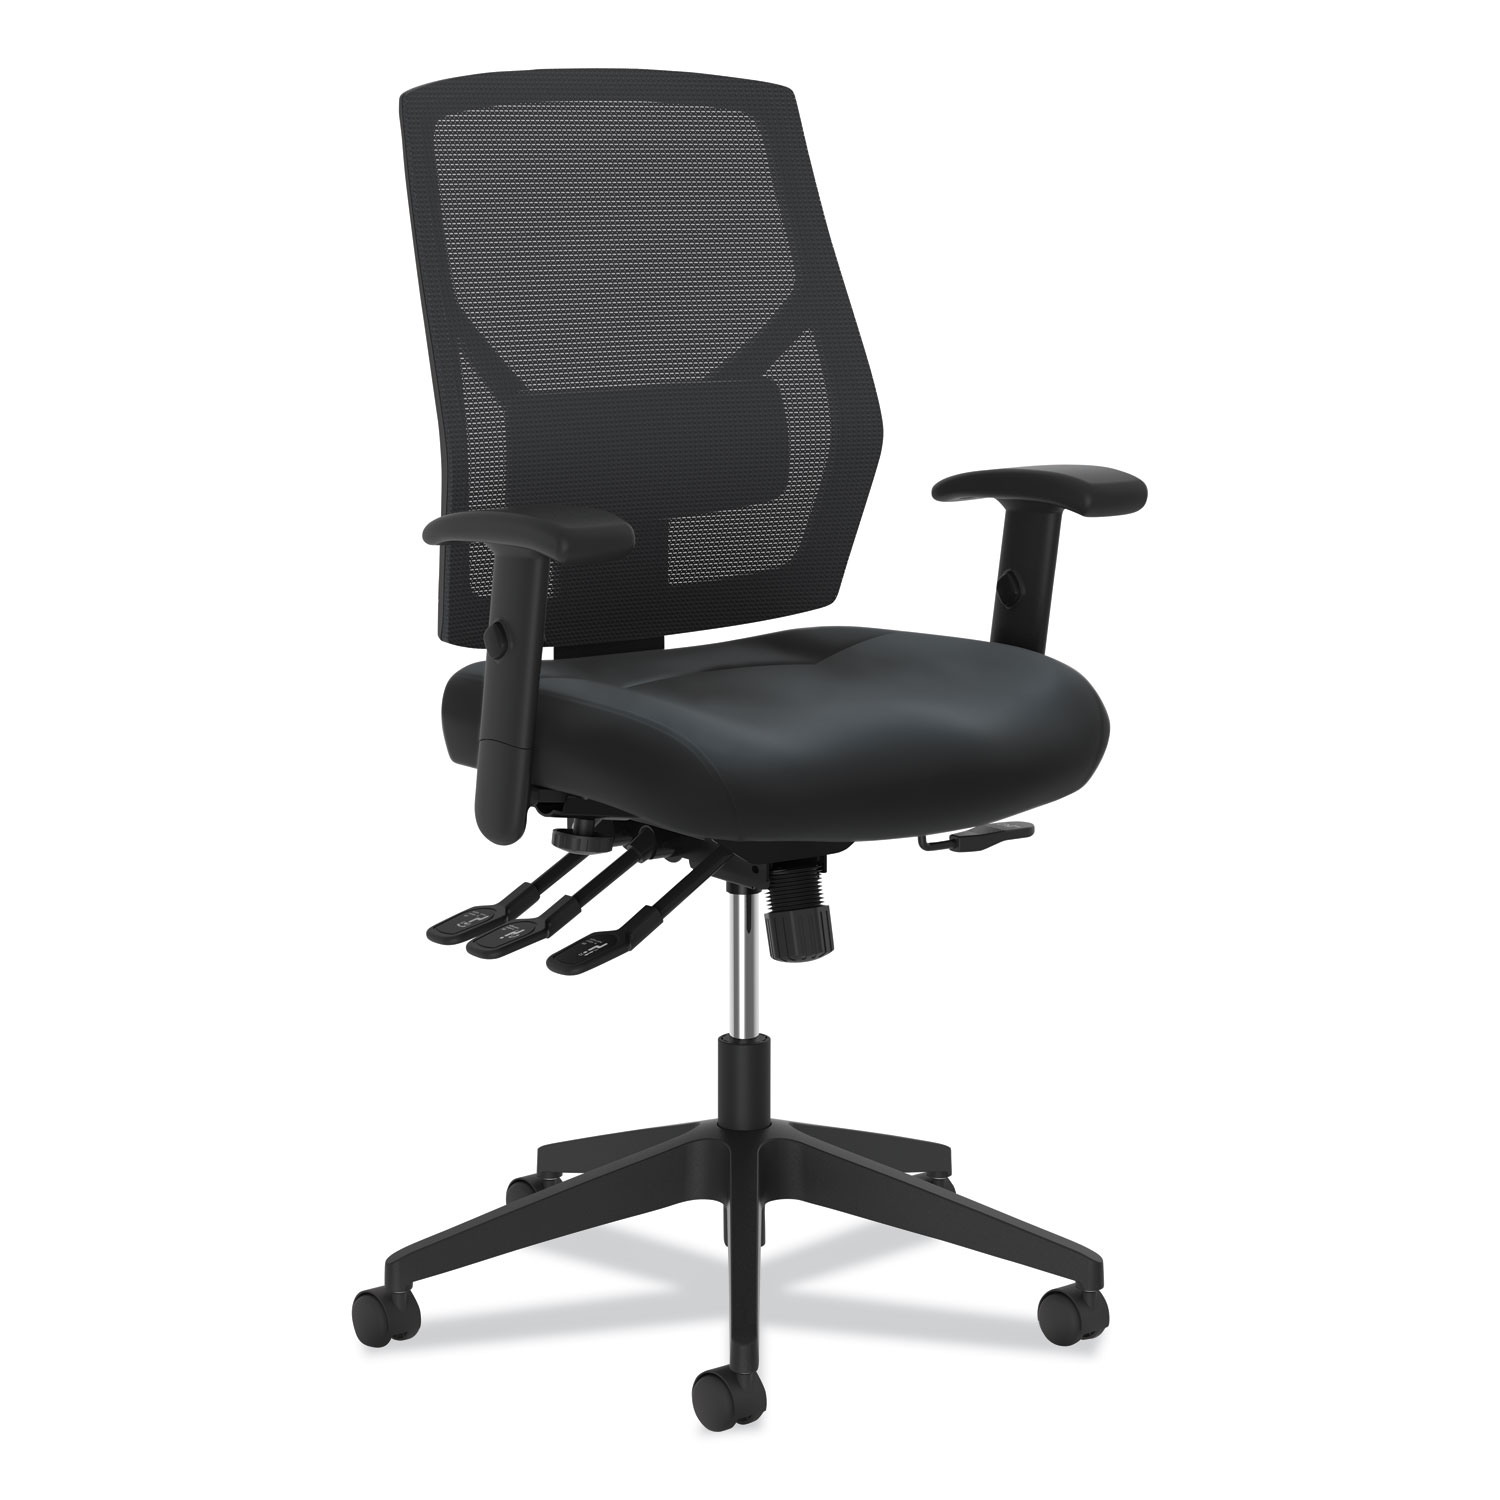  HON BSXVL582SB11T Crio High-Back Task Chair with Asynchronous Control, Supports up to 250 lbs., Black Seat/Black Back, Black Base (BSXVL582SB11T) 